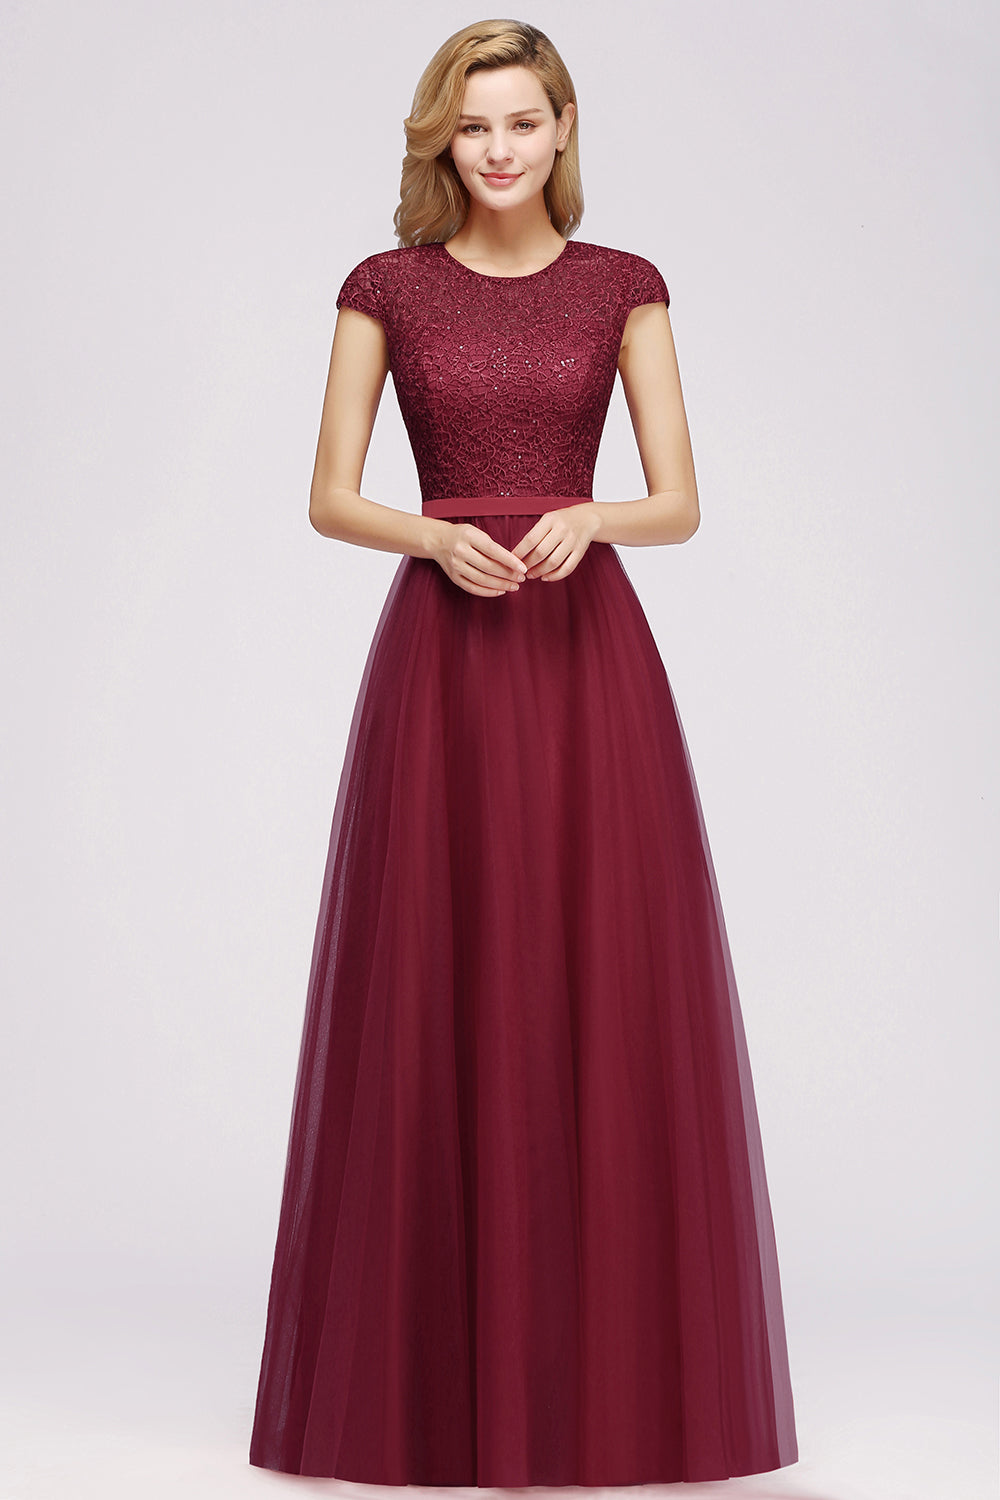 Delicate Long A-Line Lace Tulle Bridesmaid Dress with Sleeves-BIZTUNNEL